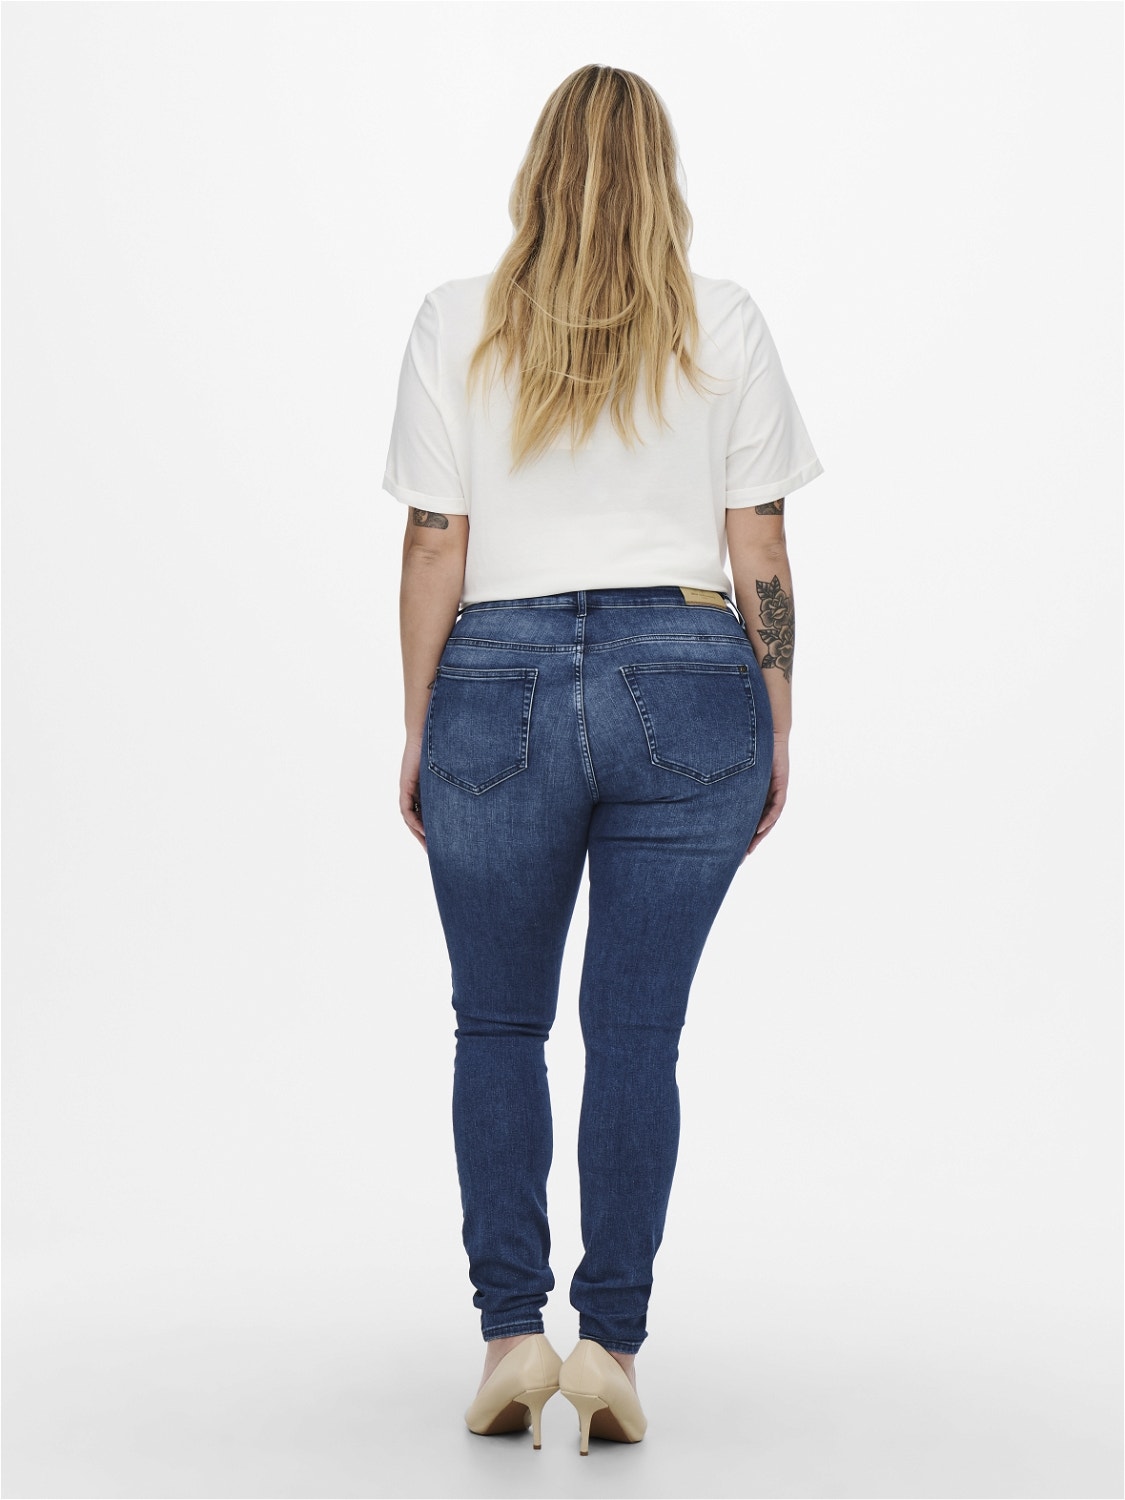 ONLY Skinny Fit Mittlere Taille Jeans -Medium Blue Denim - 15247044